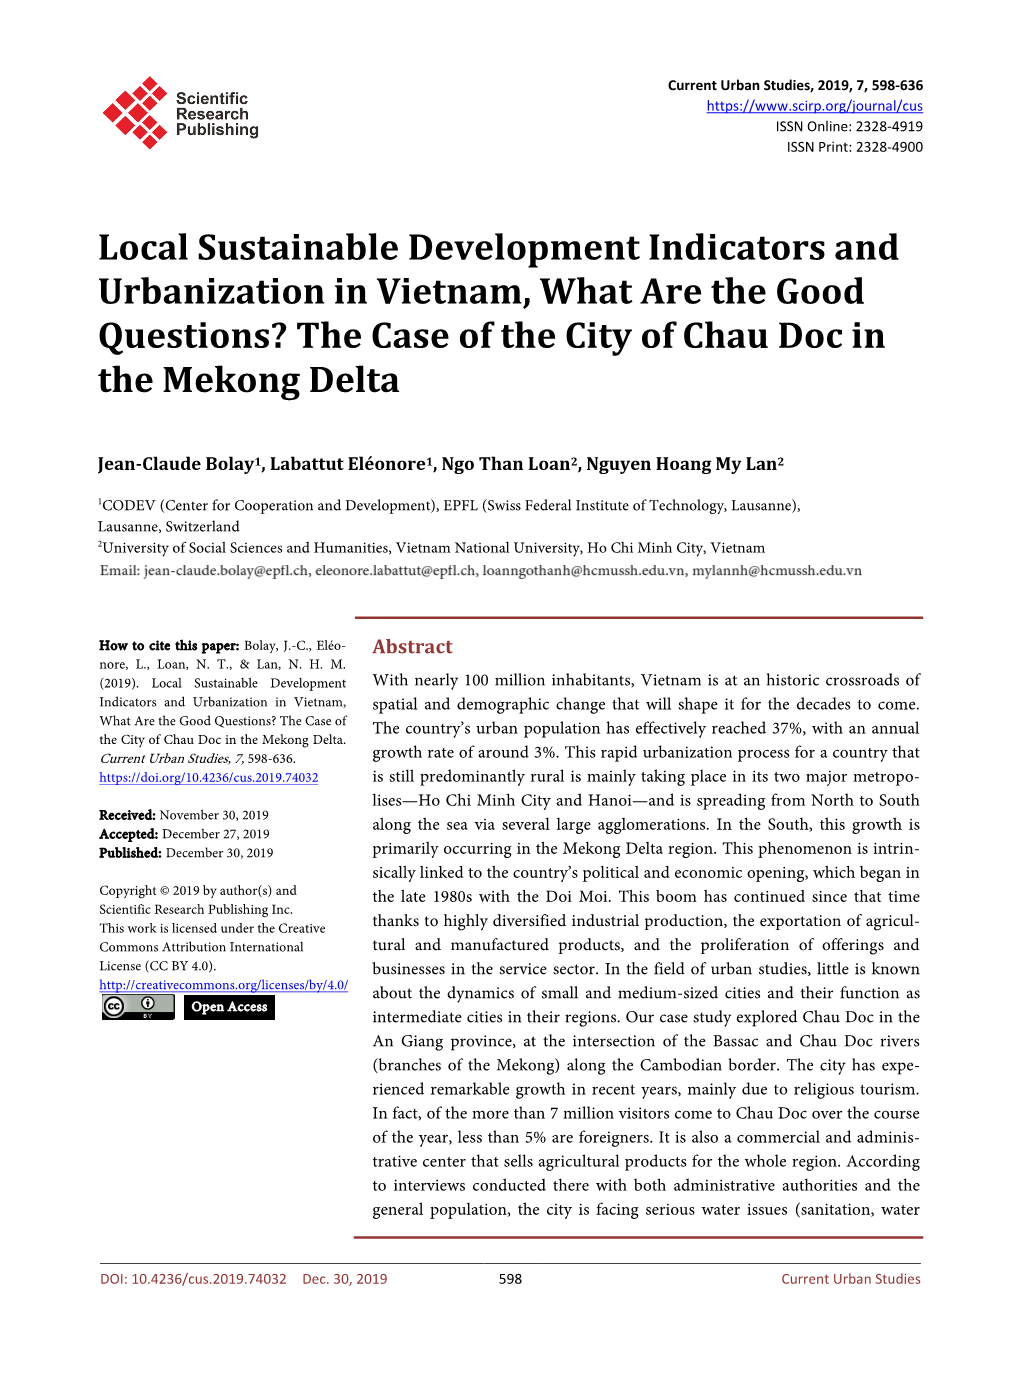 Local Sustainable Development Indicators and Urbanization in Vietnam, What Are the Good Questions? the Case of the City of Chau Doc in the Mekong Delta